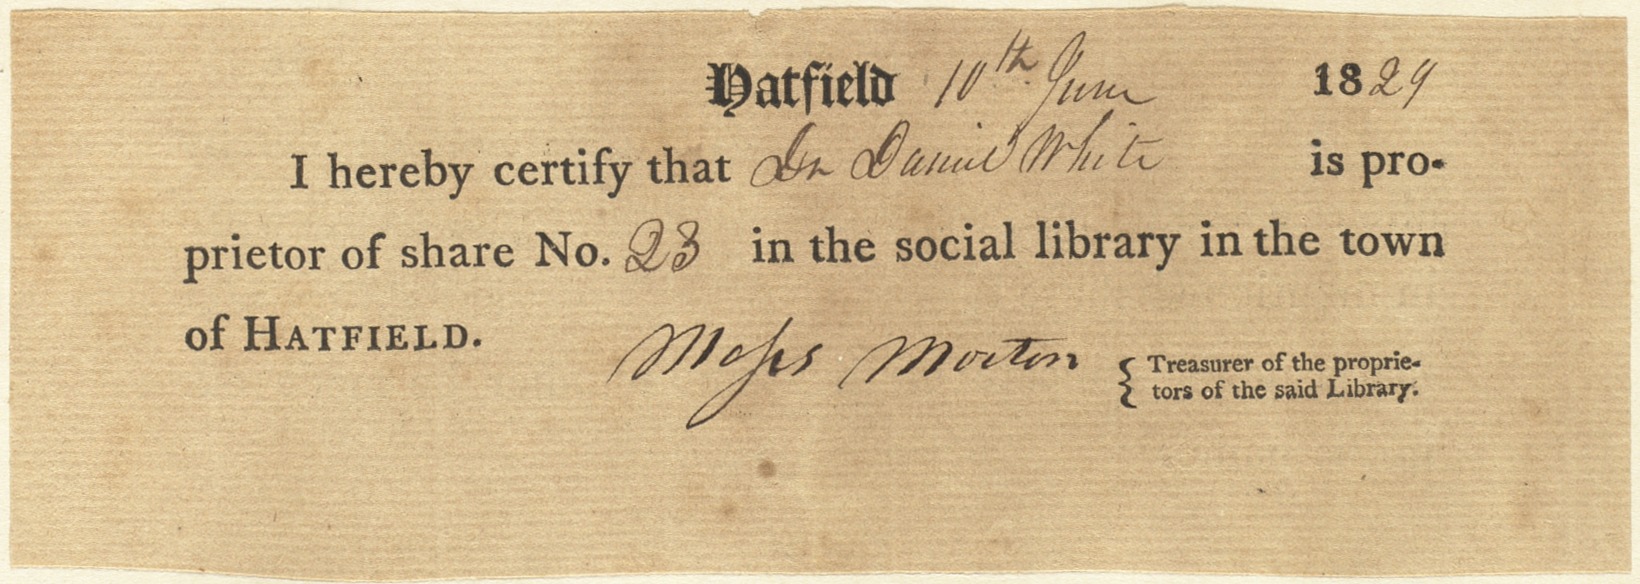 Receipt, Daniel White holds share 23 in the “social library” in Hatfield, June 10, 1829